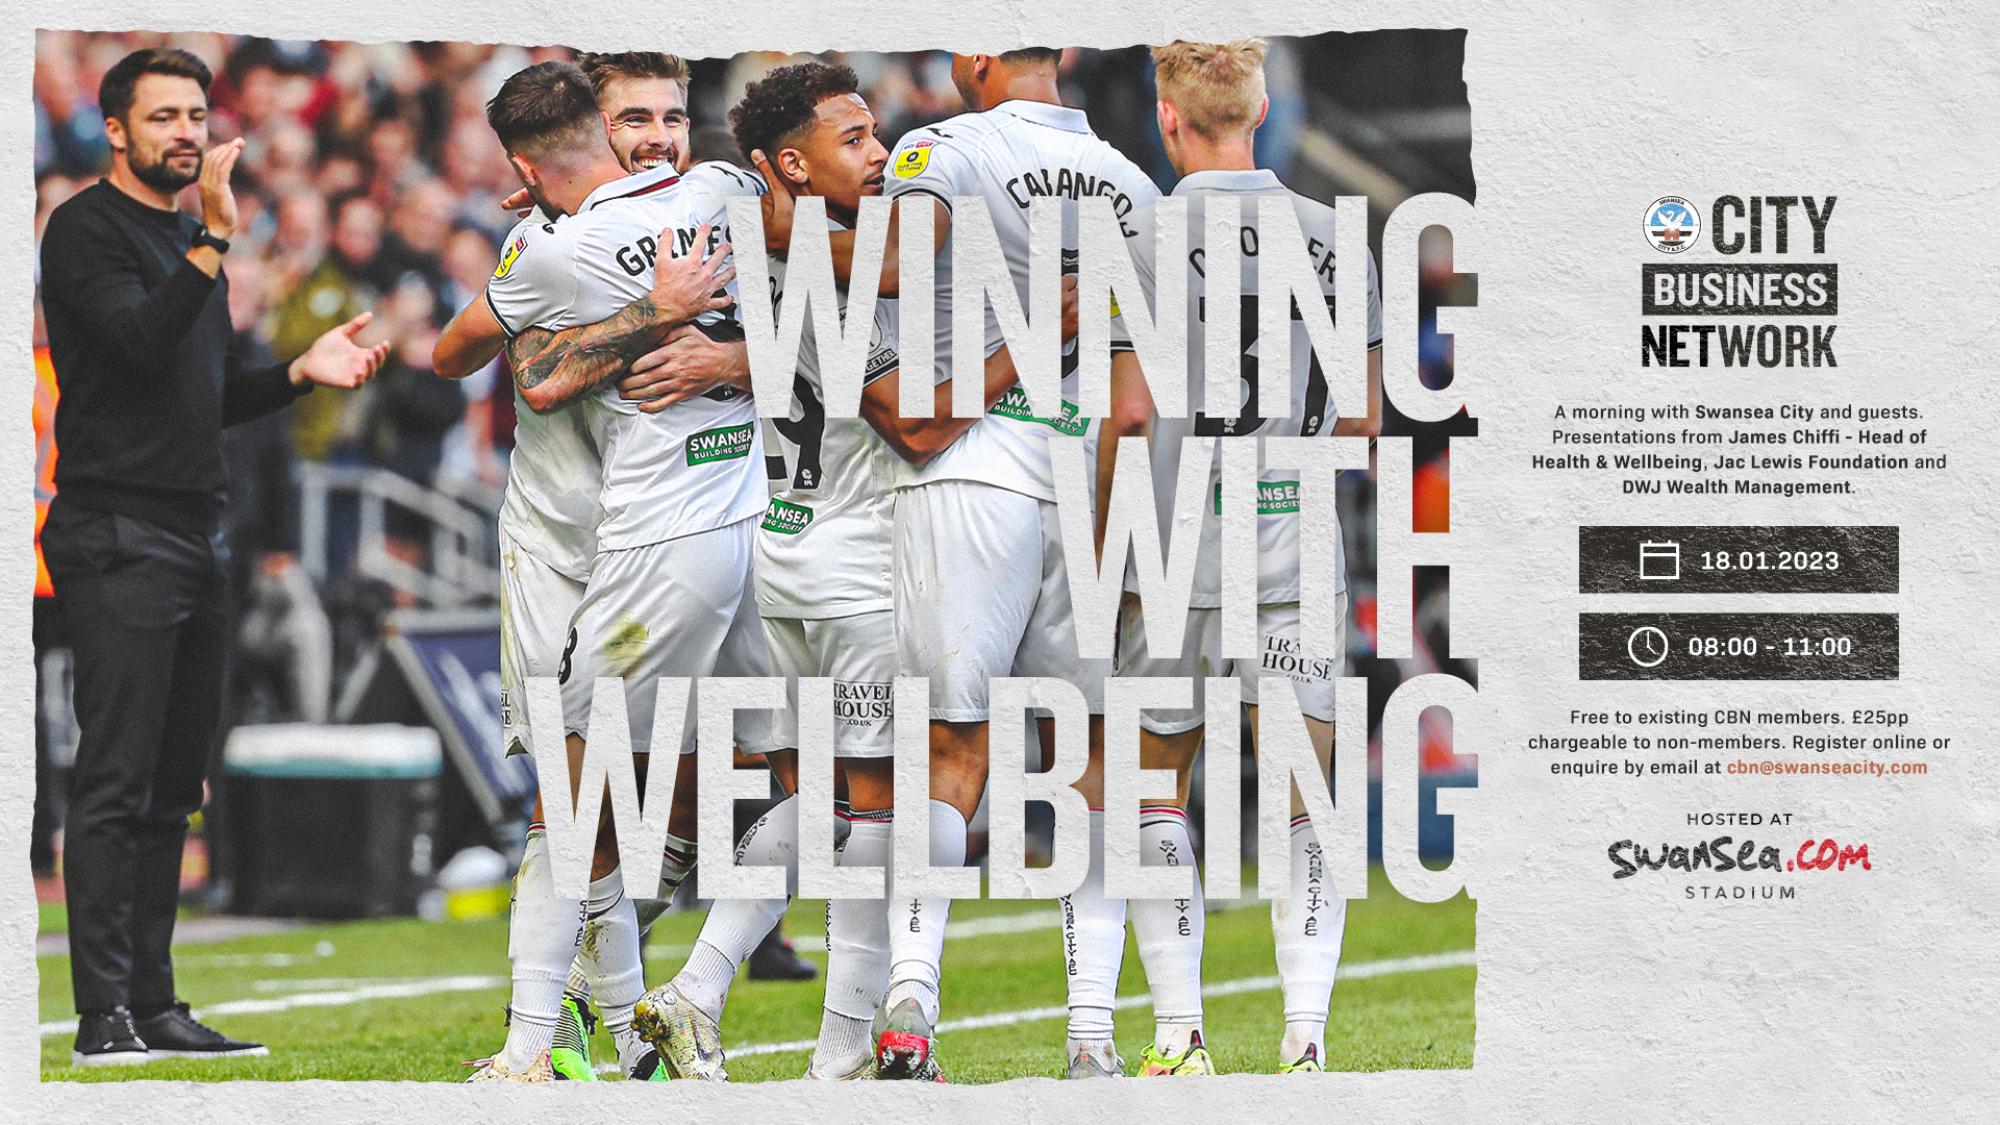 Winning with Wellbeing